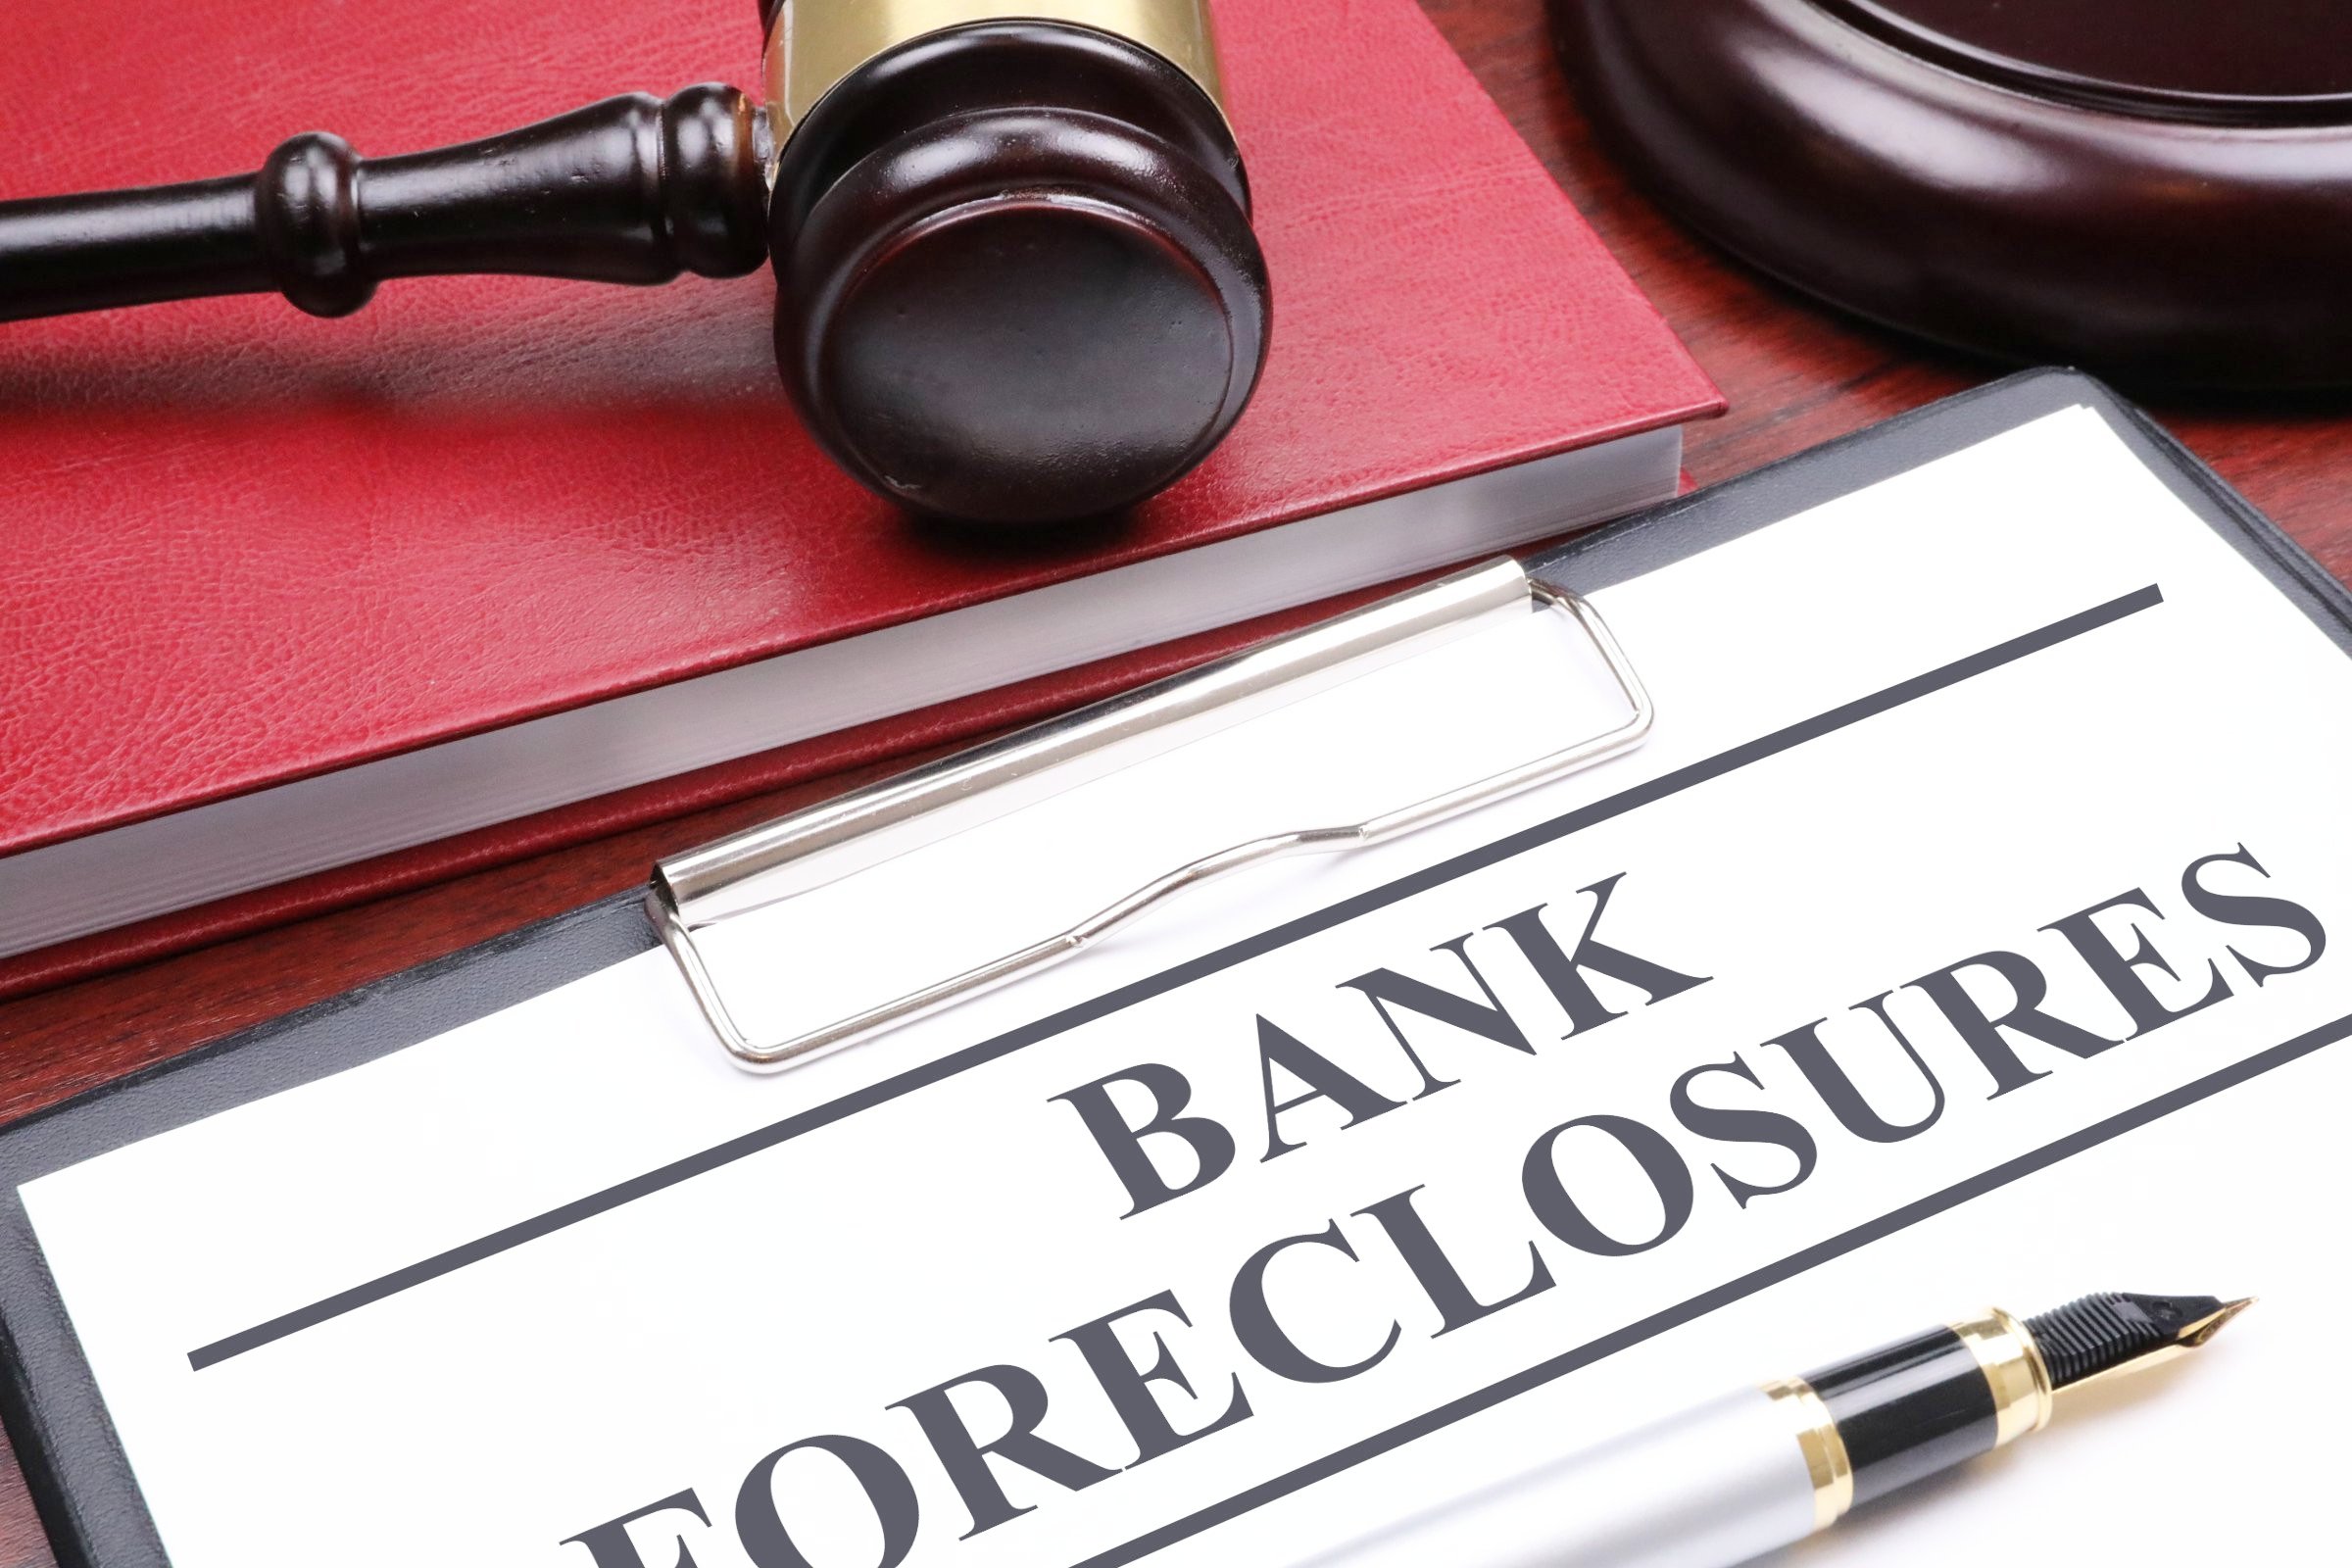 bank foreclosures